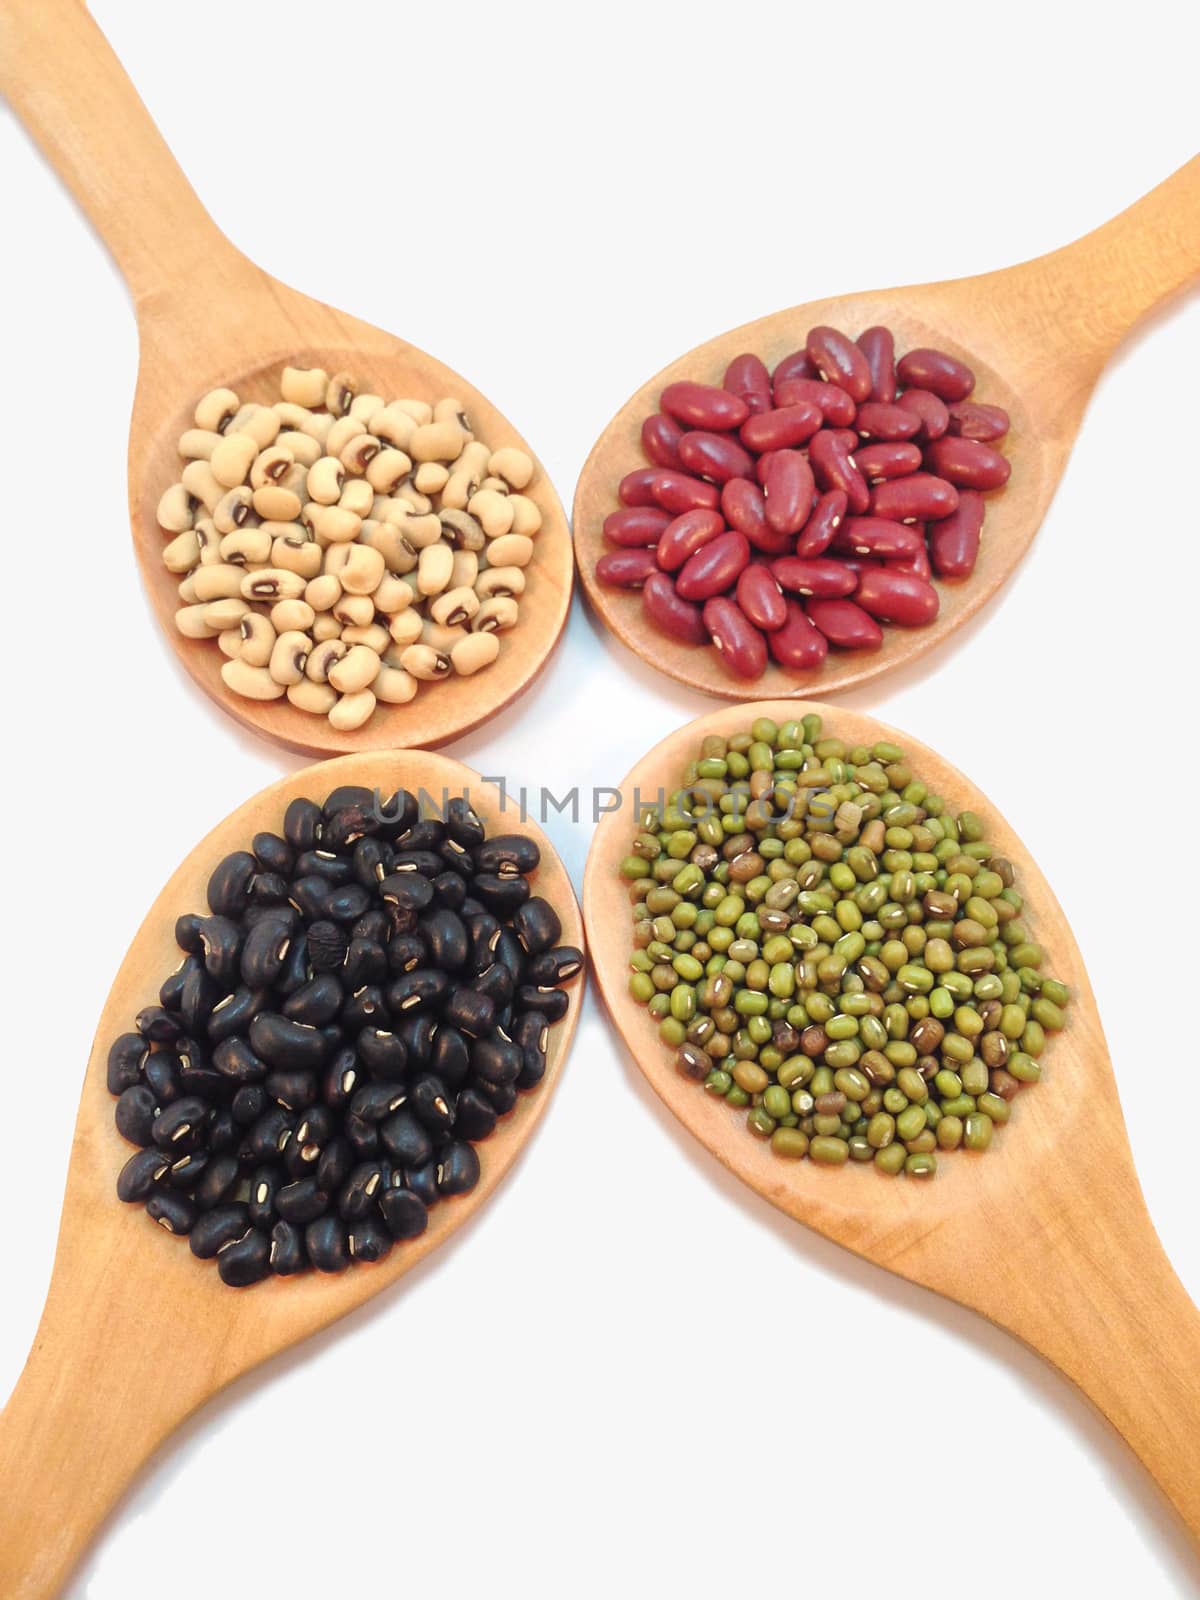 Varieties of beans, peas on white background by Bowonpat